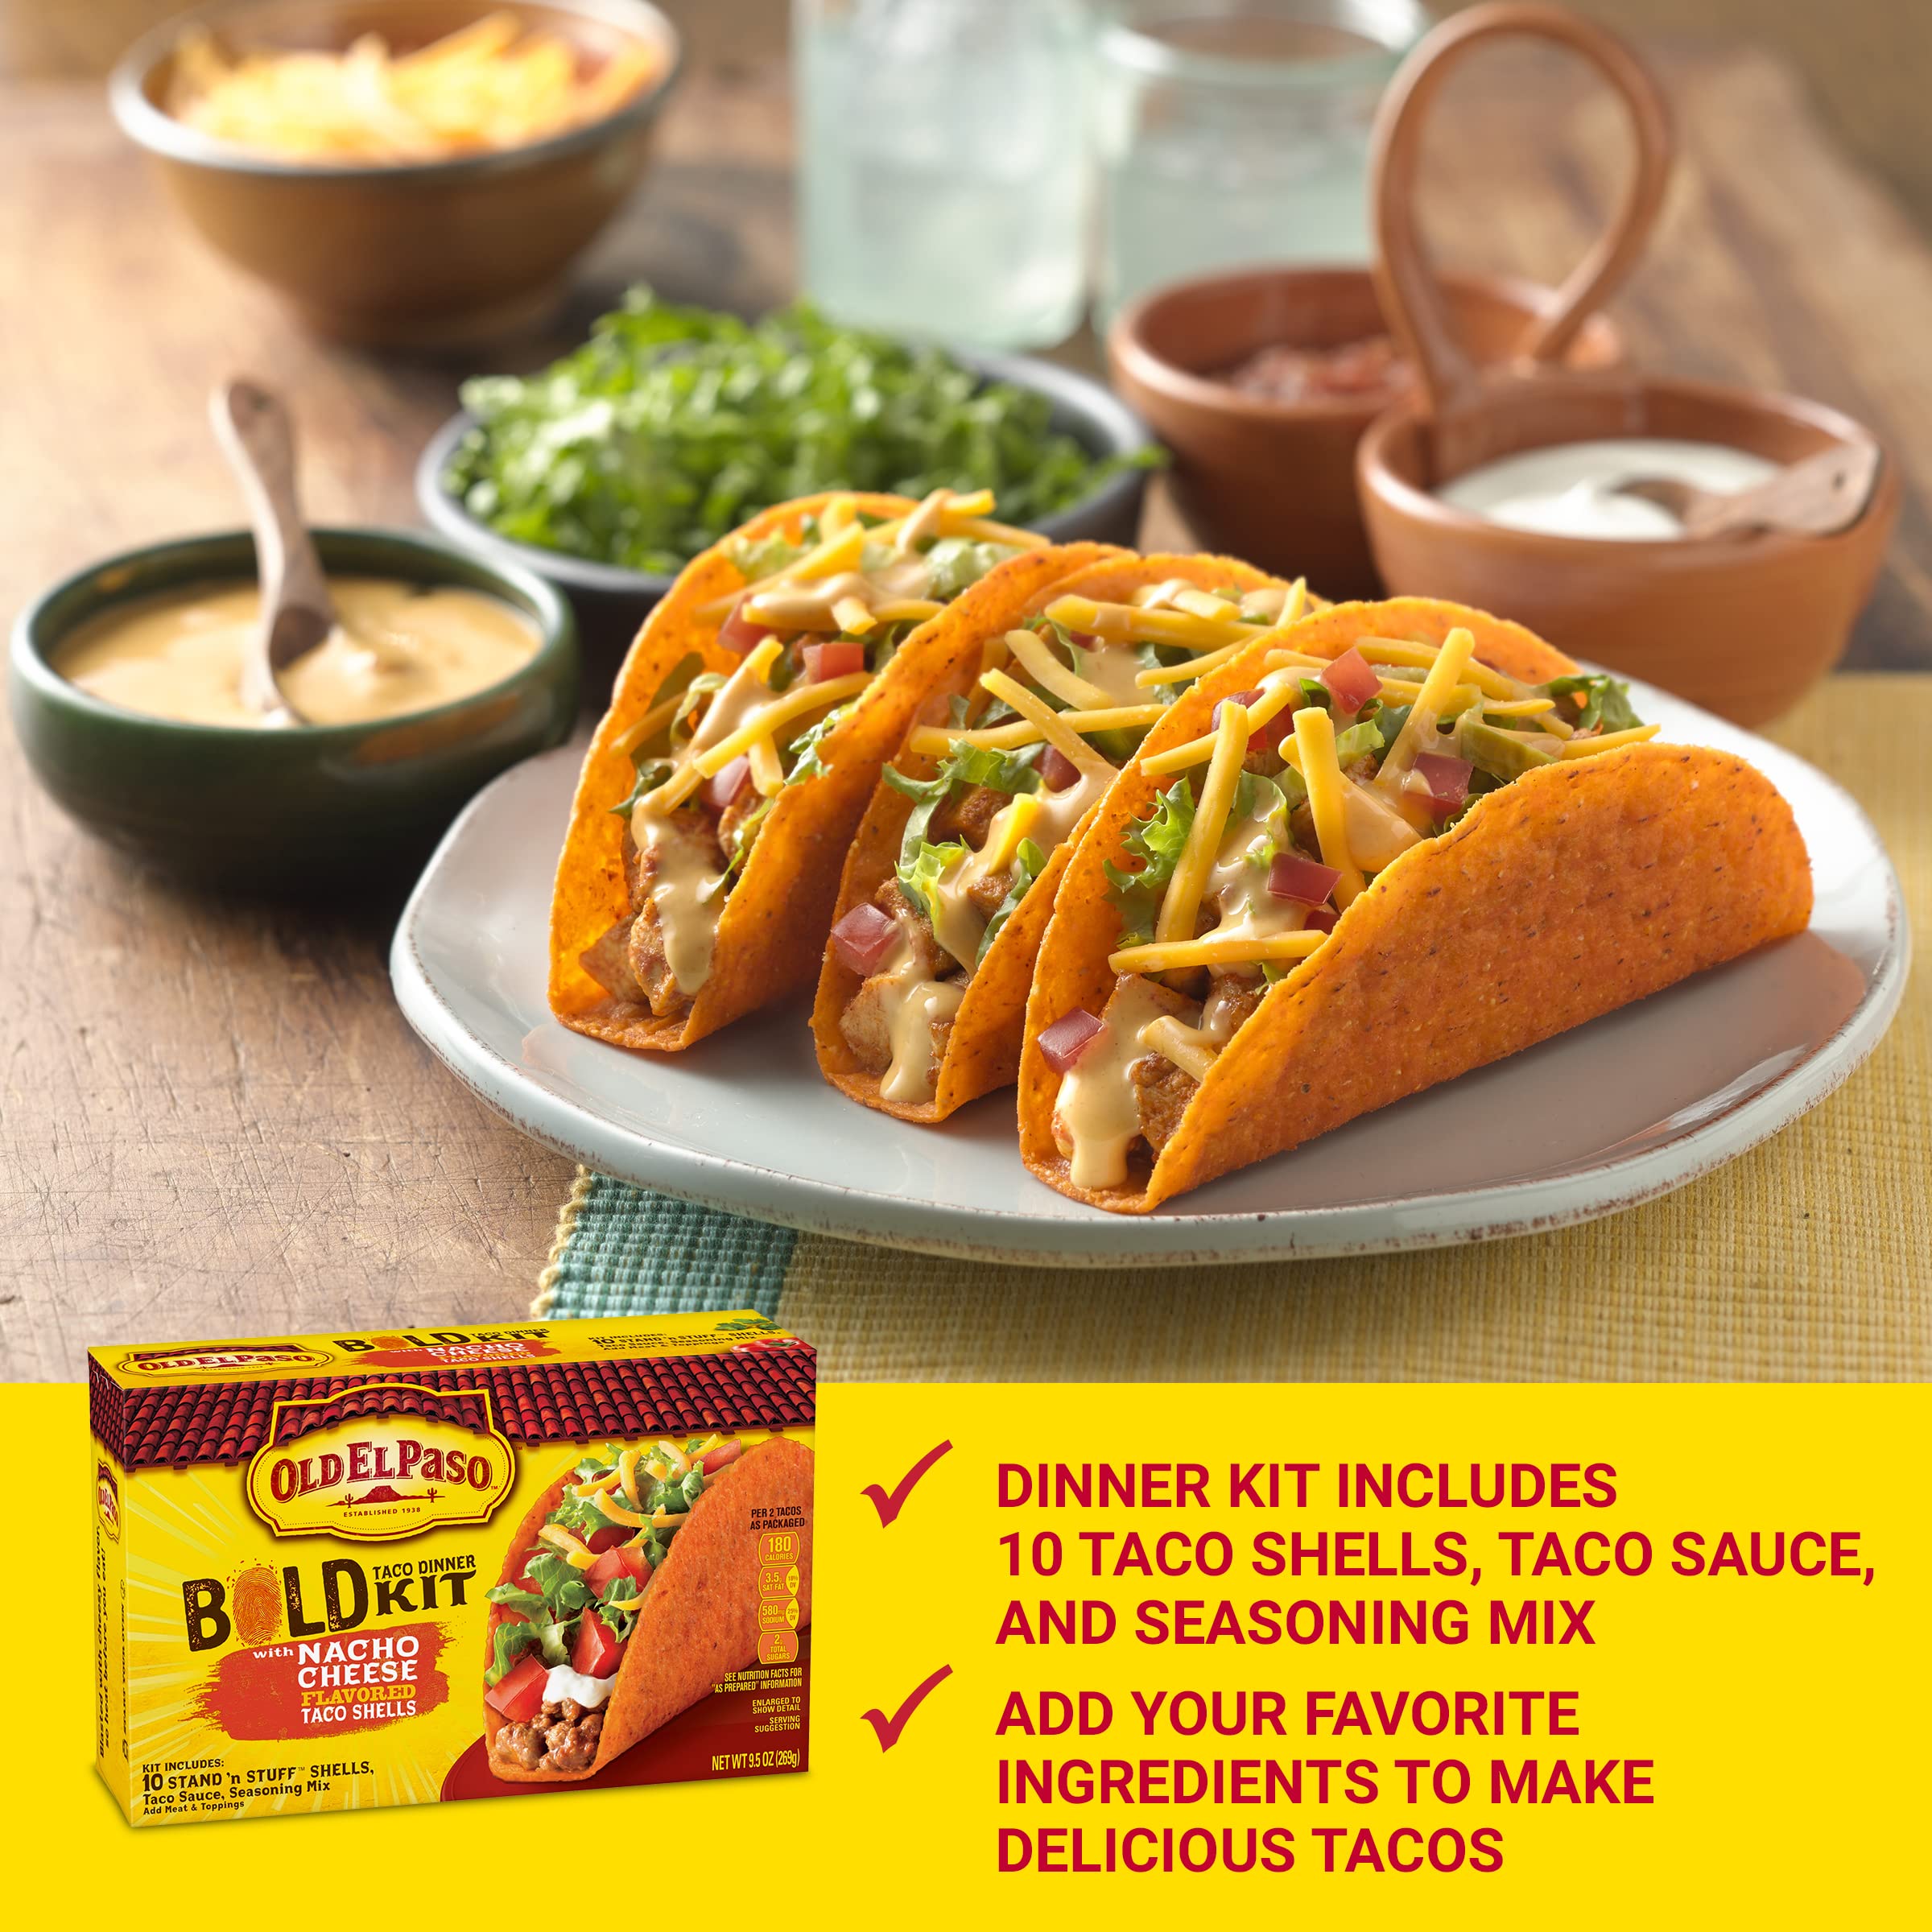 Old El Paso Stand 'N Stuff Bold Nacho Cheese Flavored Taco Dinner Kit, 9.5 oz.